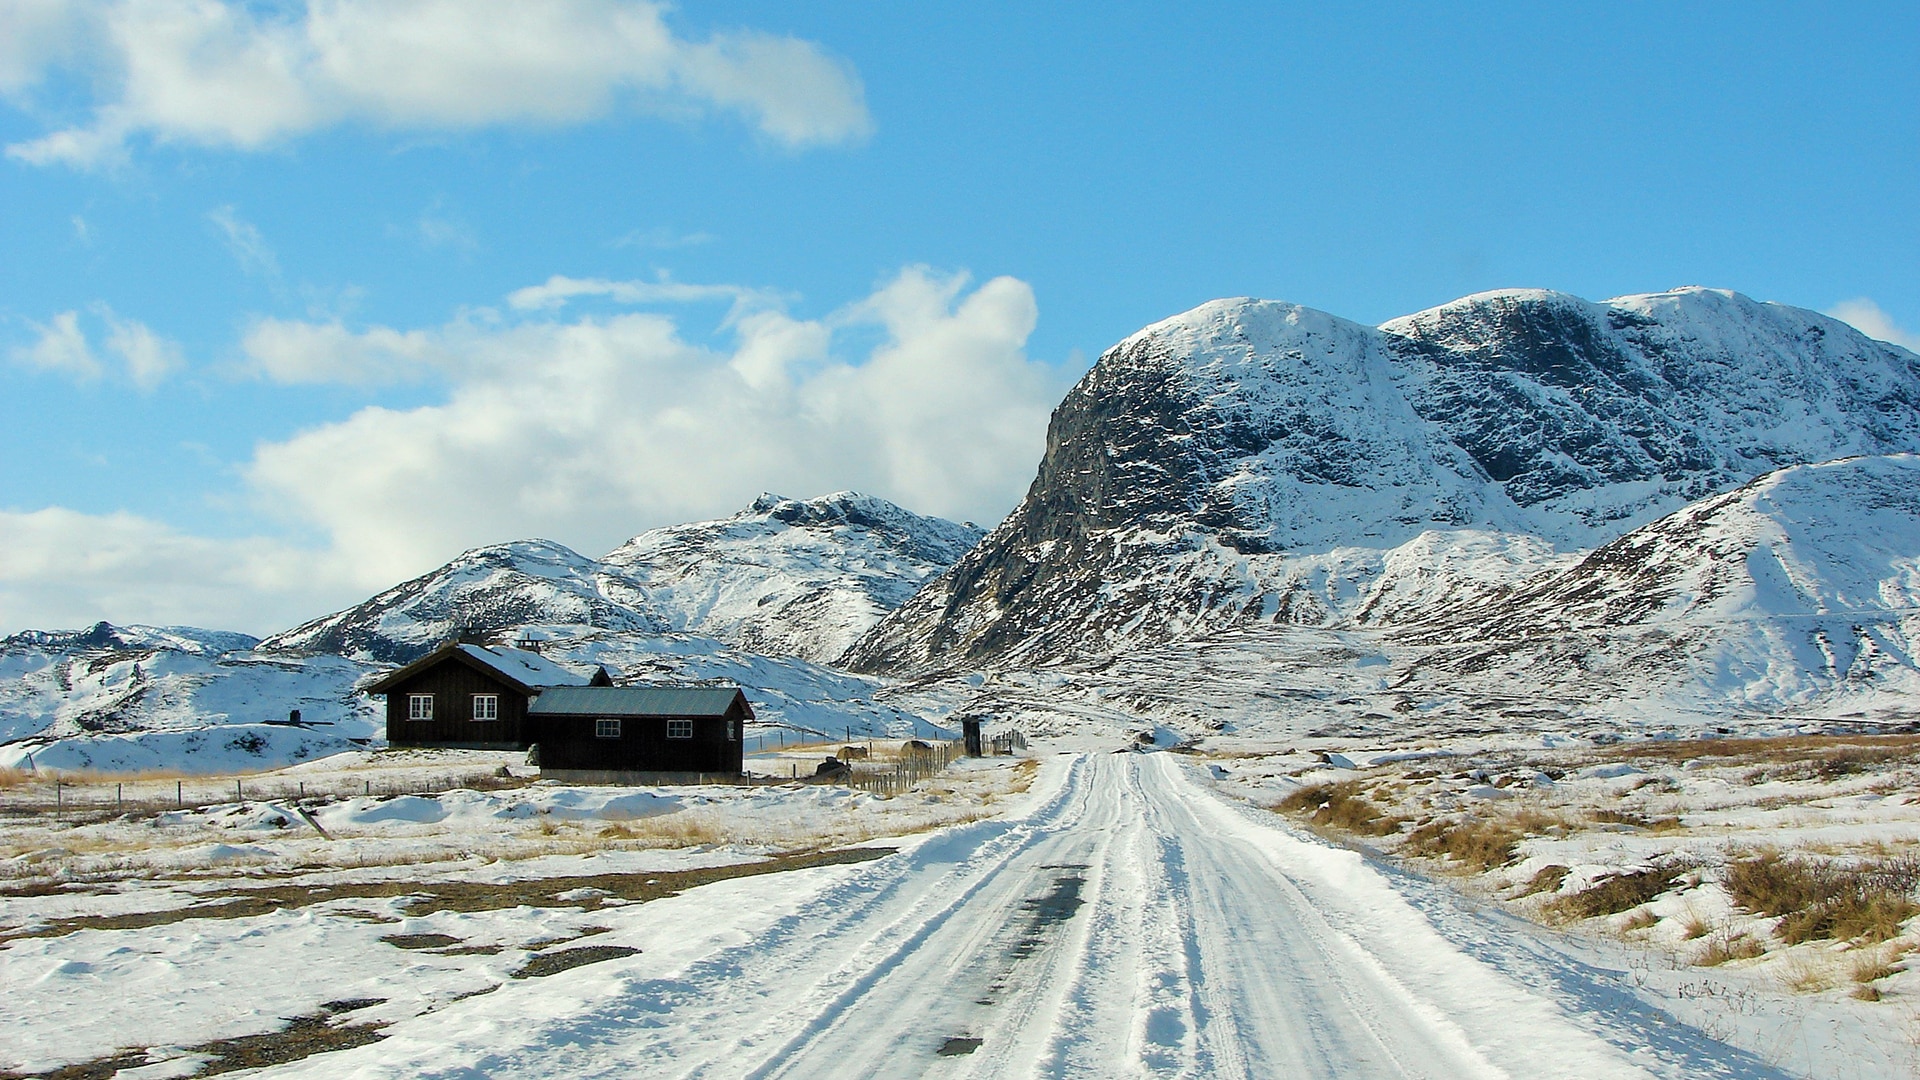 The snow covered road of Jotunheimvegen in wintertime passing mountains and two remote houses.